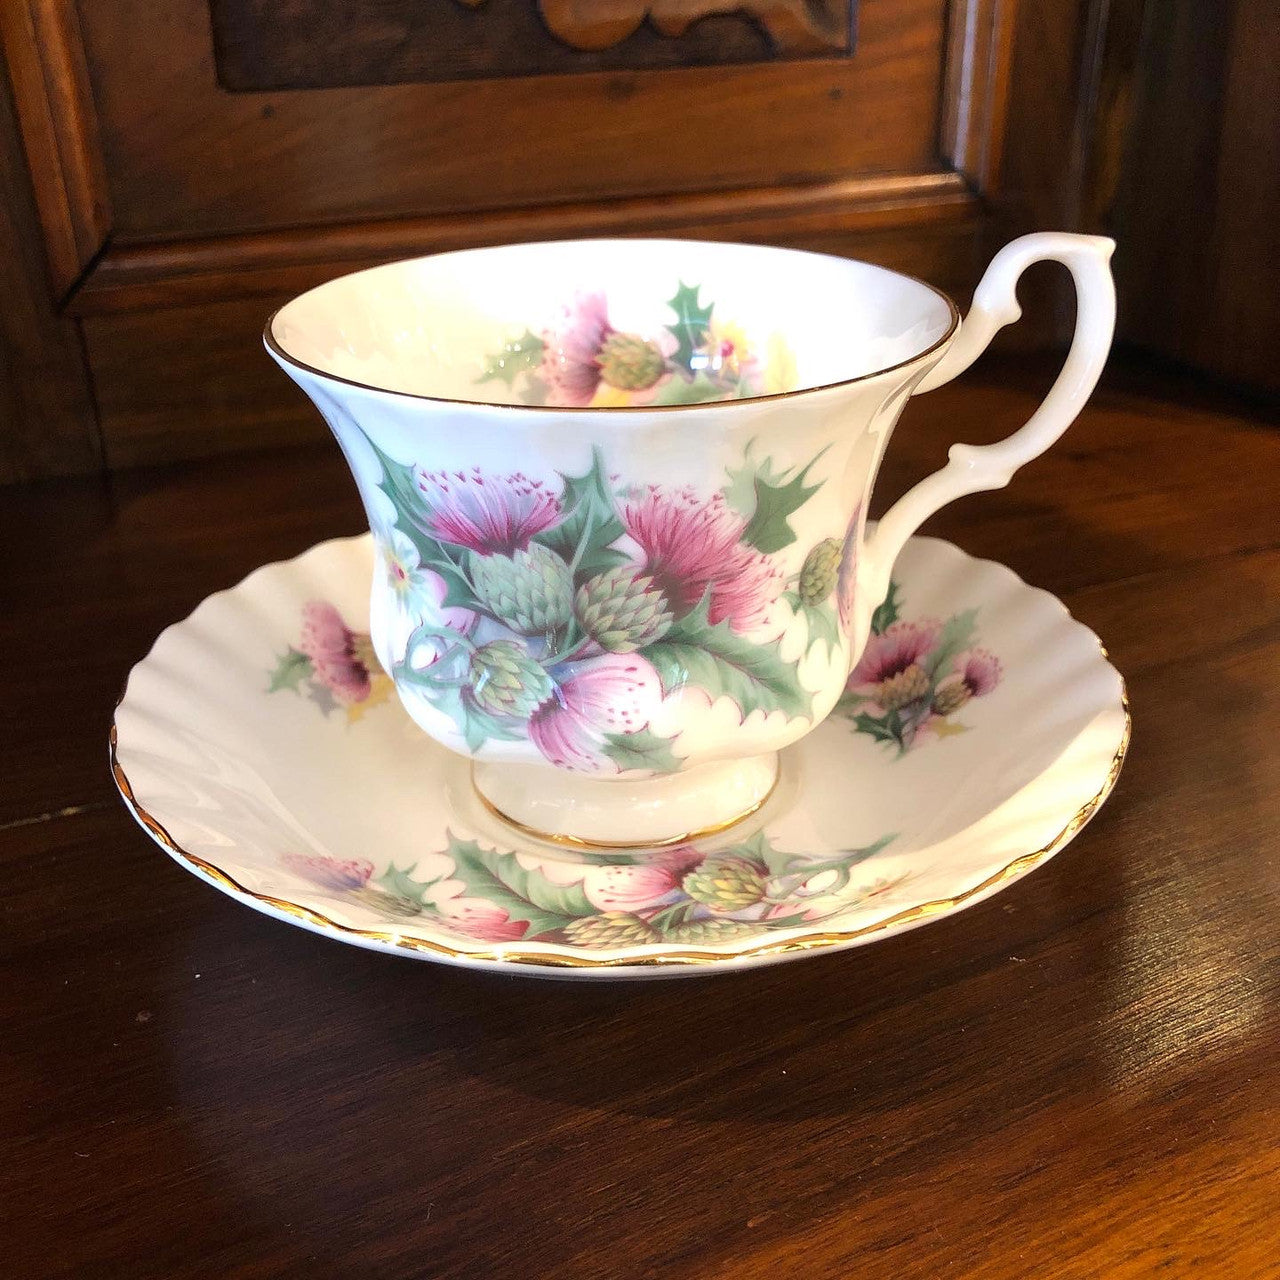 Royal Albert, Avebury, Summertime Series, Purple Thistle, Tea Cup, Cup, Saucer, Cup and Saucer, Montrose Shape, Vintage, Steampunk, England